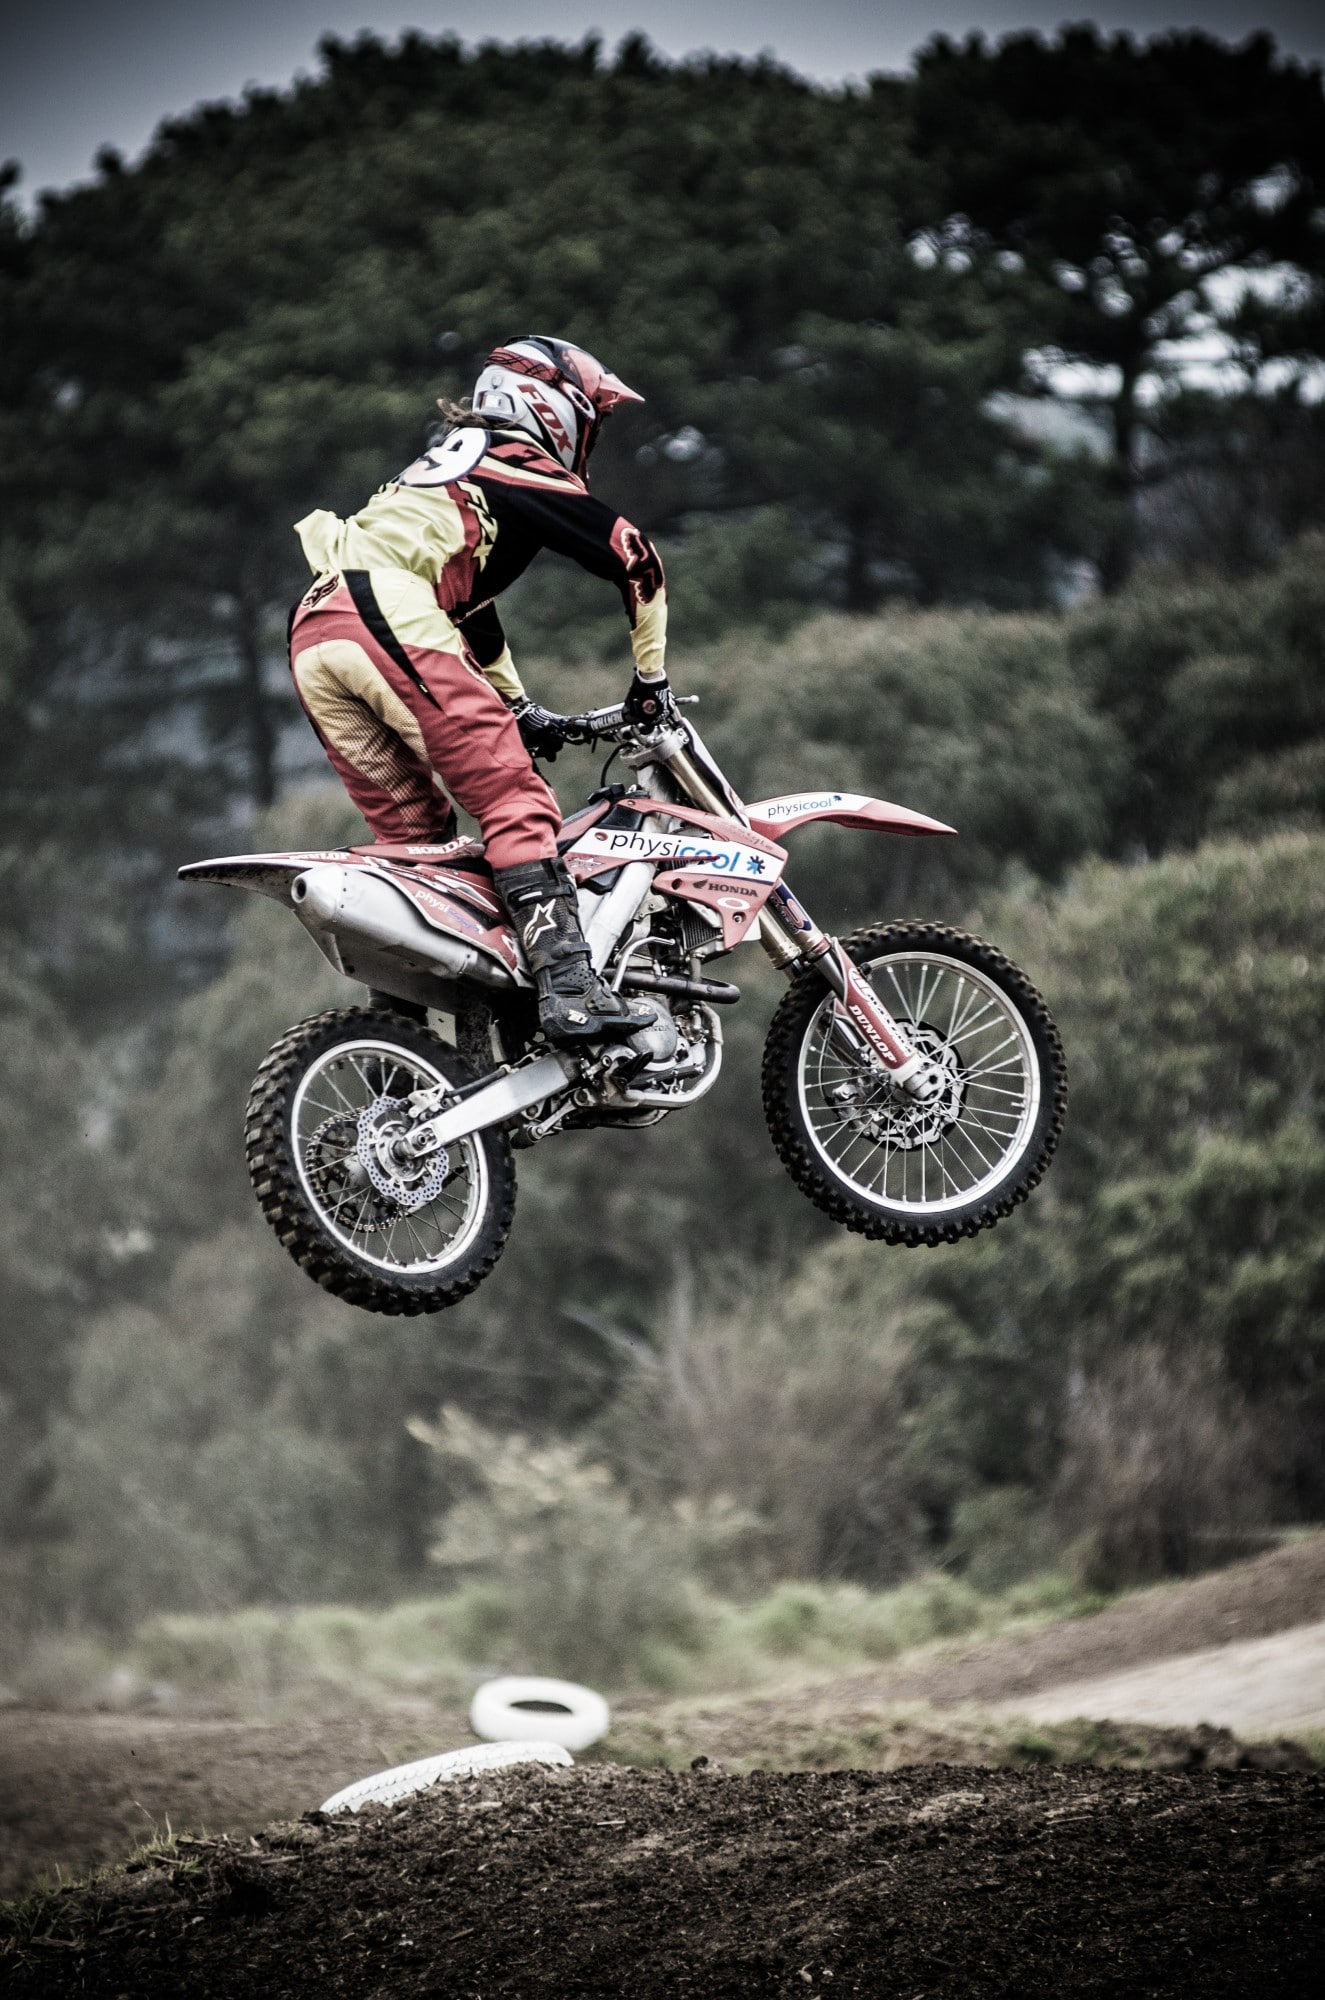 Ride Safely: How to Prevent Serious Dirt Biking Accidents